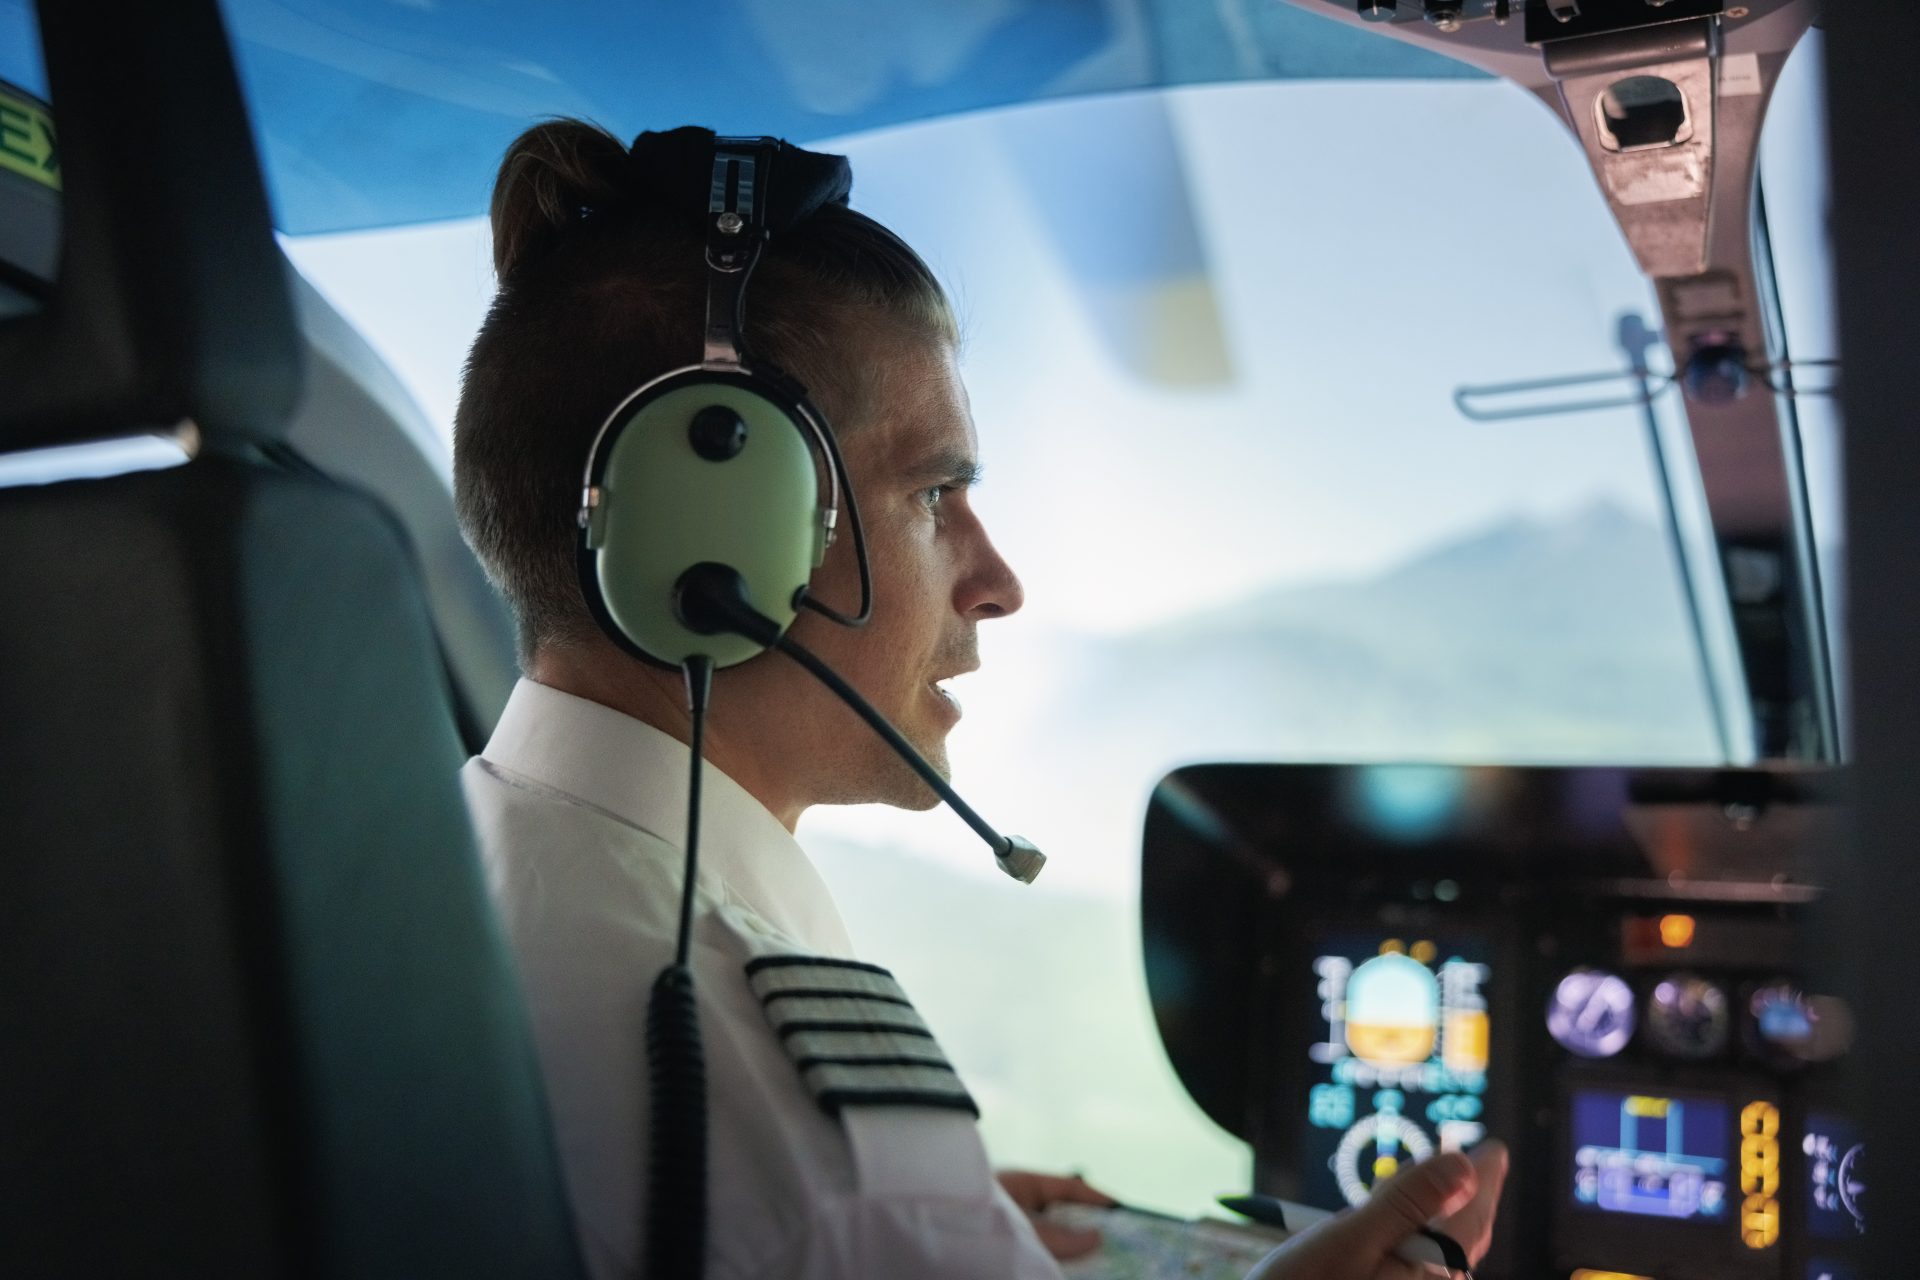 <p>Passing through a turbulent zone generates panic among those who are afraid to fly.<br> Patrick Smith, a pilot and writer, may be able to alleviate your fear. He has published a column on Salon.com for ten years now. It's called: "Ask the Pilot".</p>